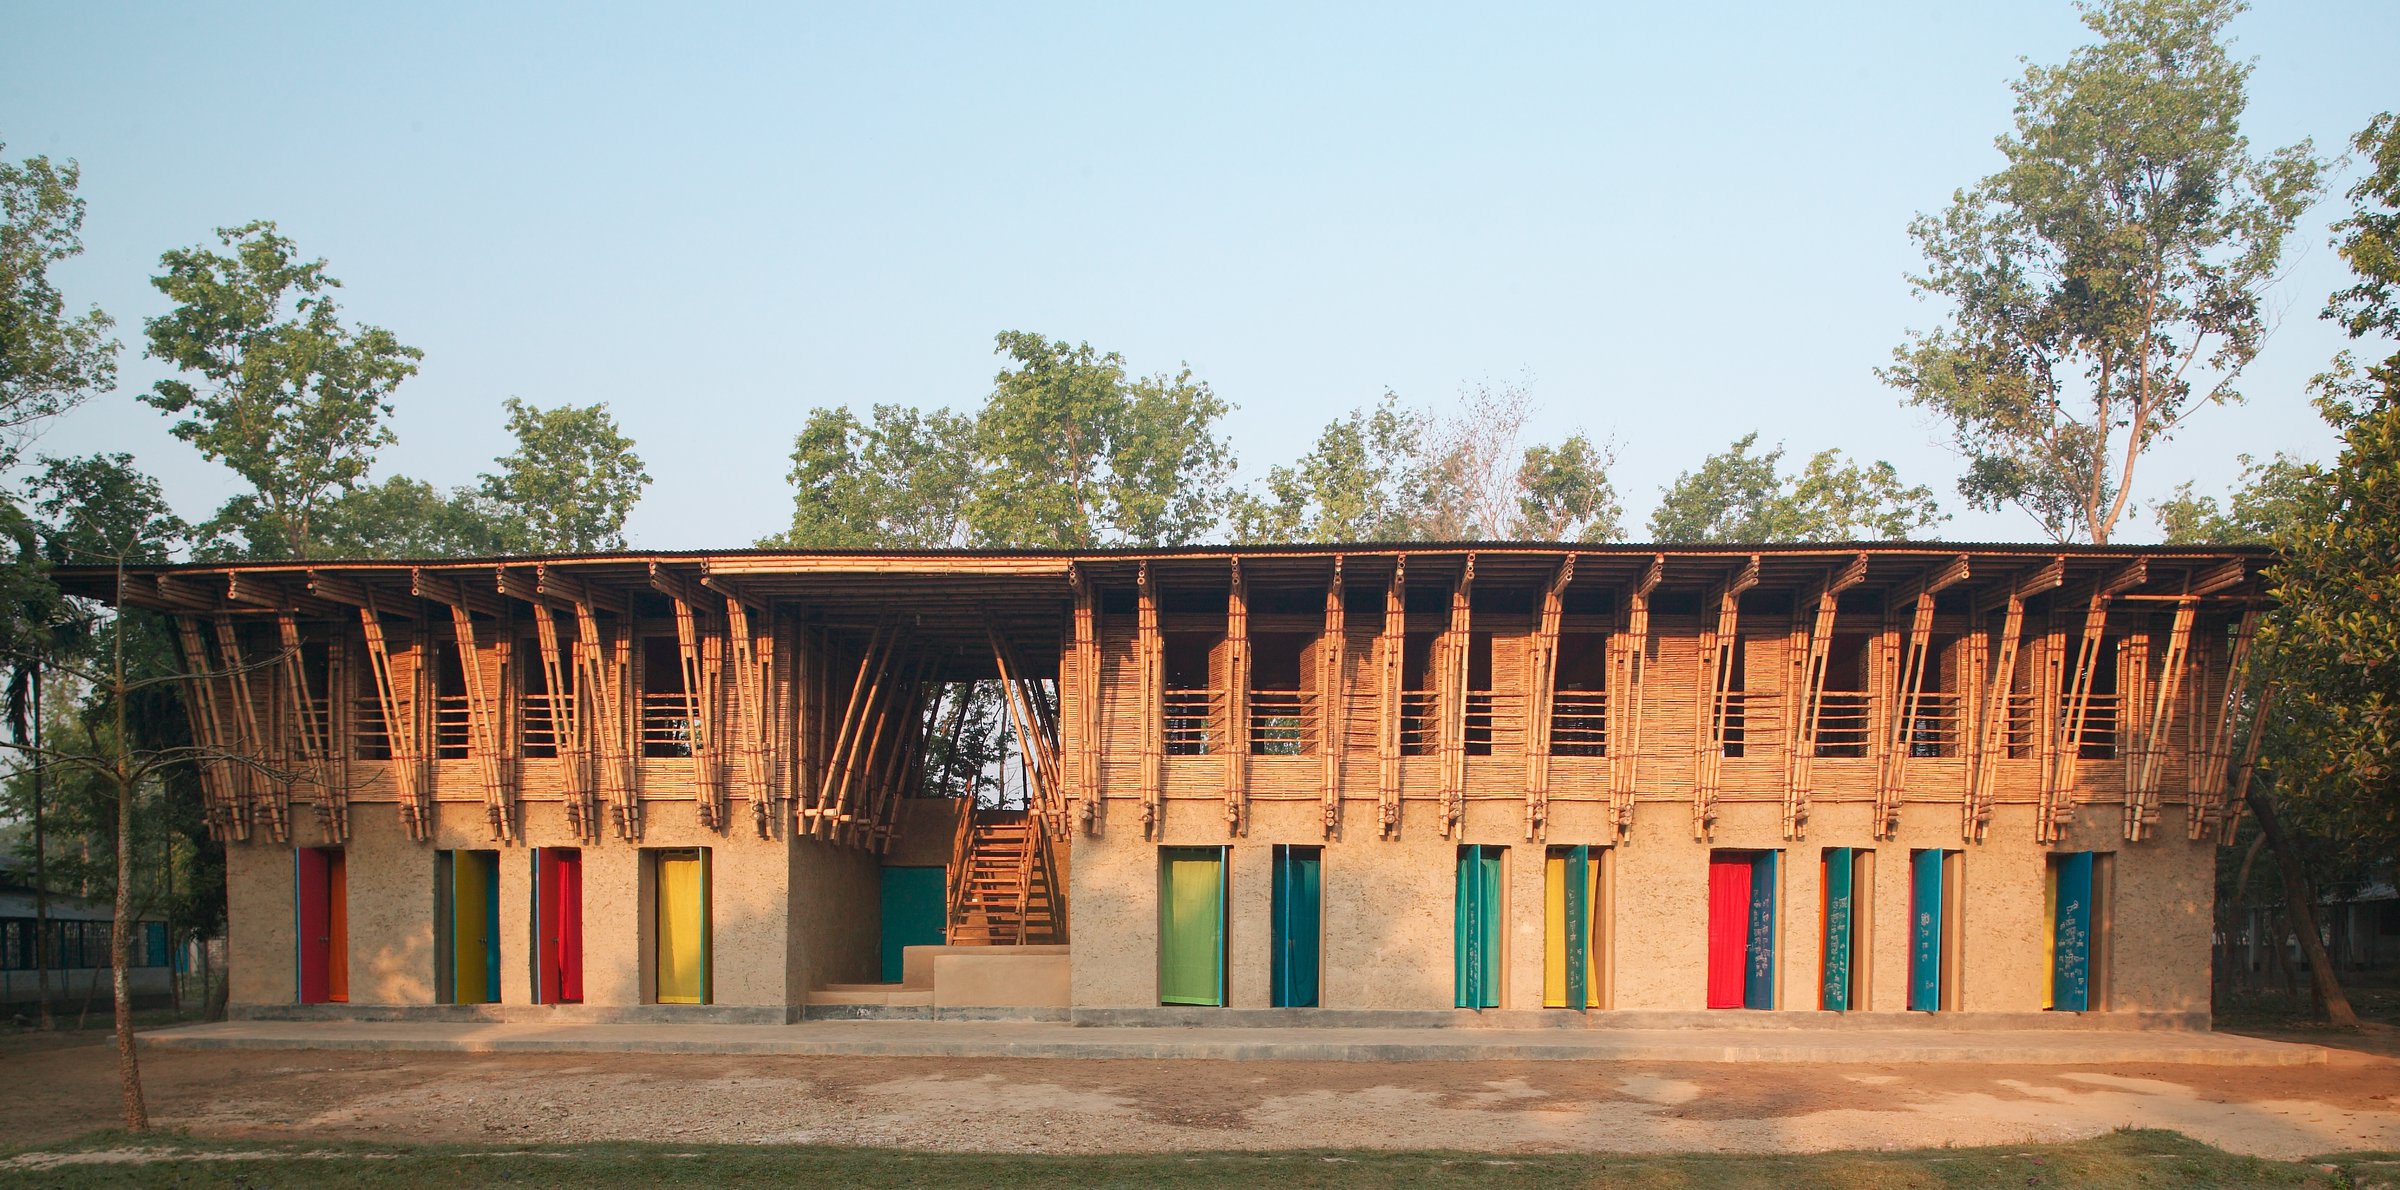 The METI School in Bangladesh used mud for walls and employed local people and craft throughout the project.